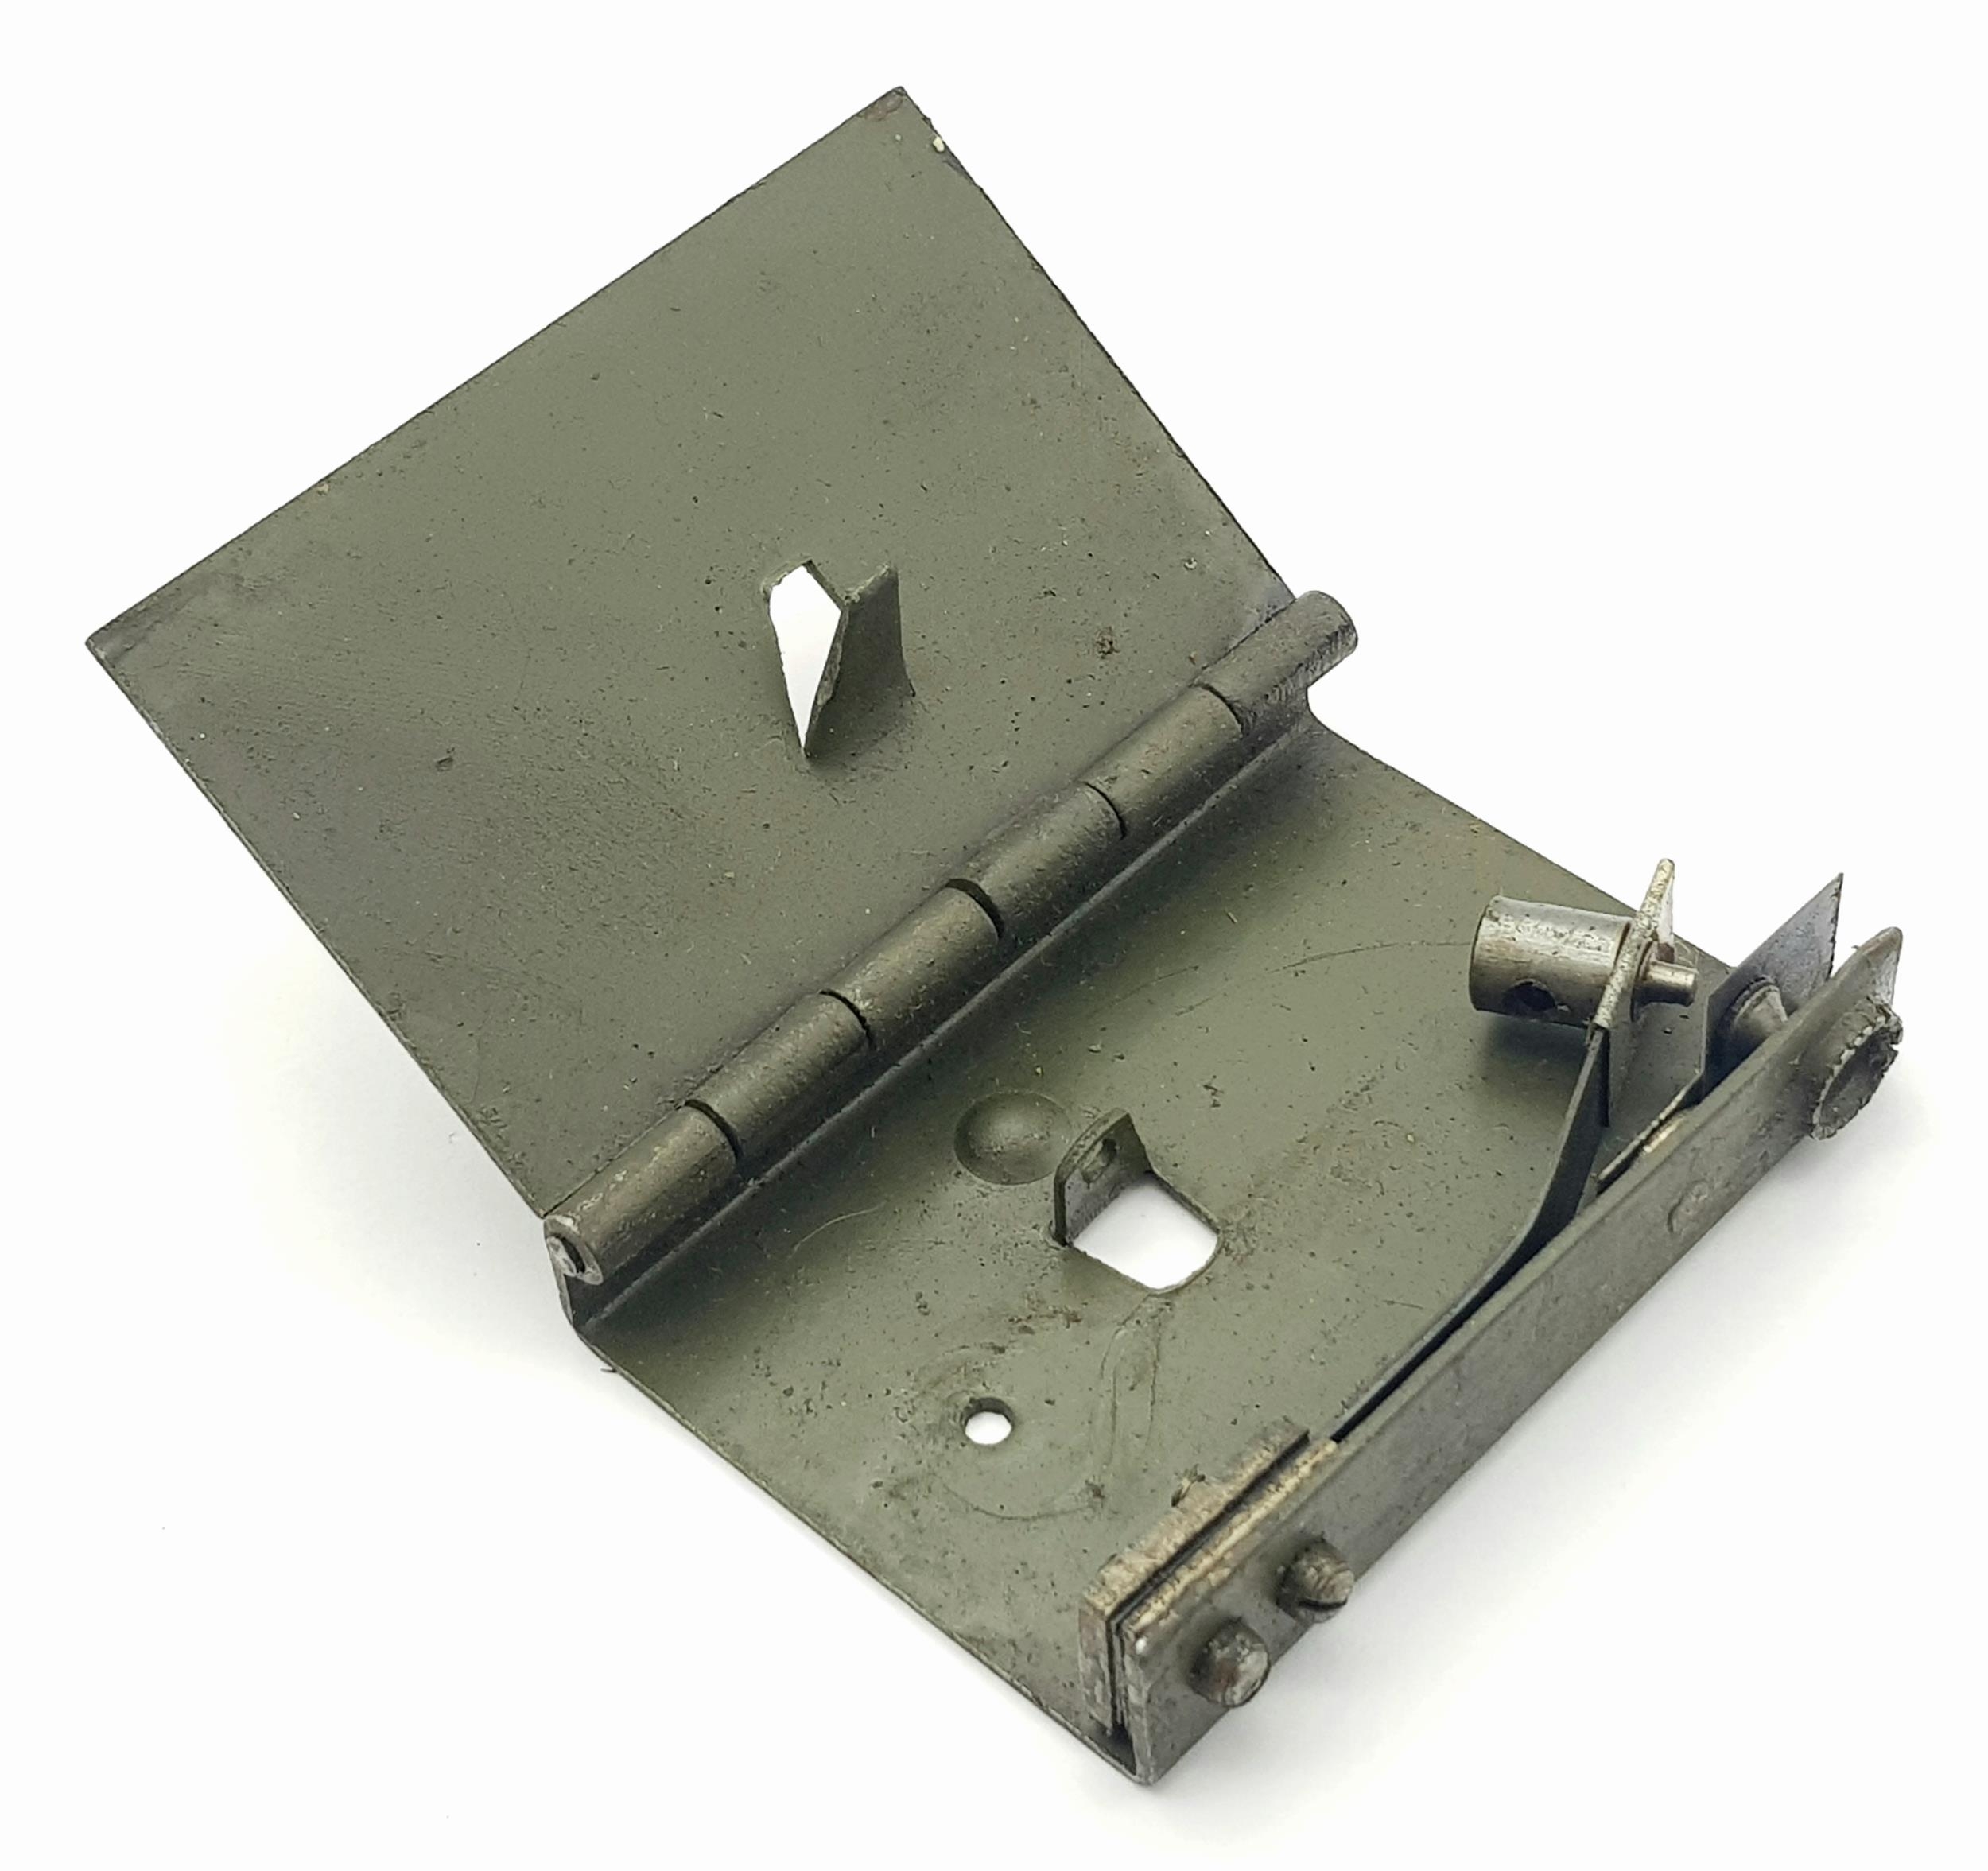 INERT WW2 SOE-OSS No 4 Booby Trap Trip Switch. This one was made in Italy for use with Italian